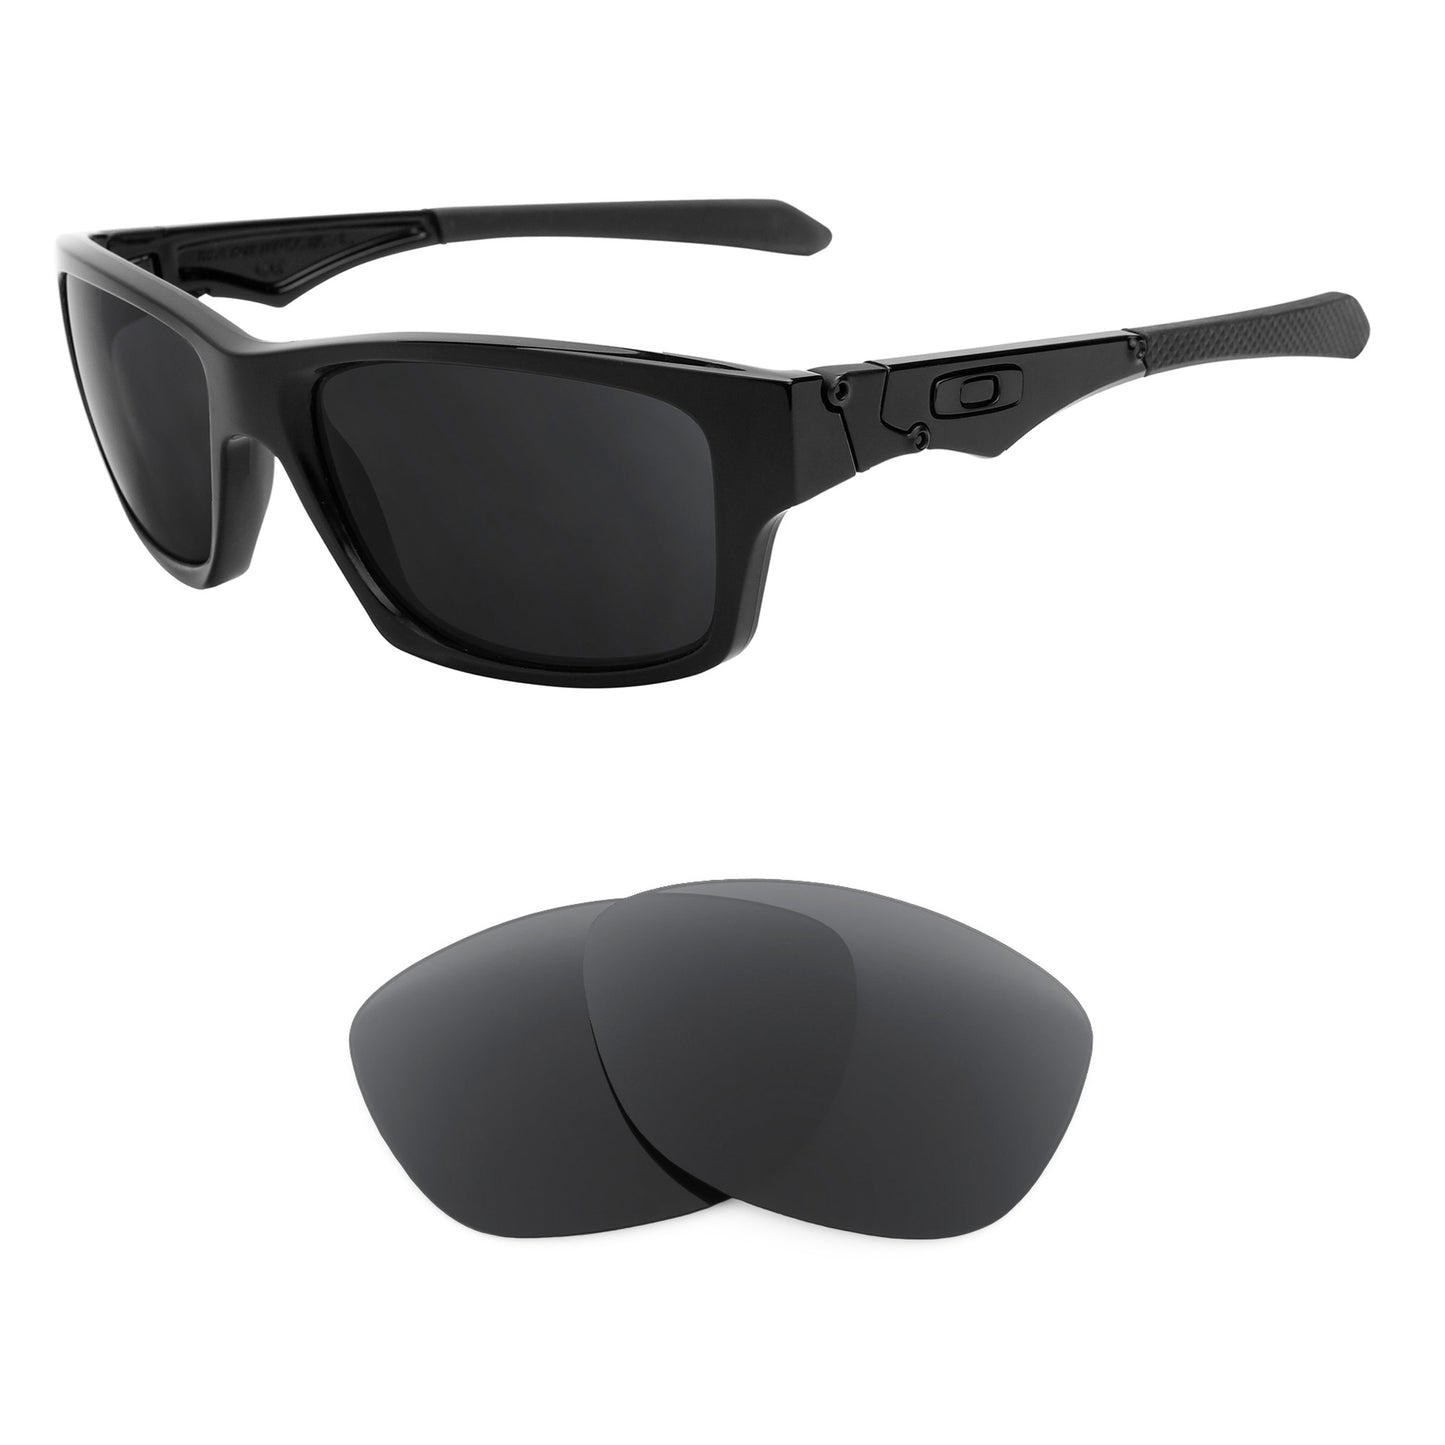 Oakley Jupiter Carbon sunglasses with replacement lenses